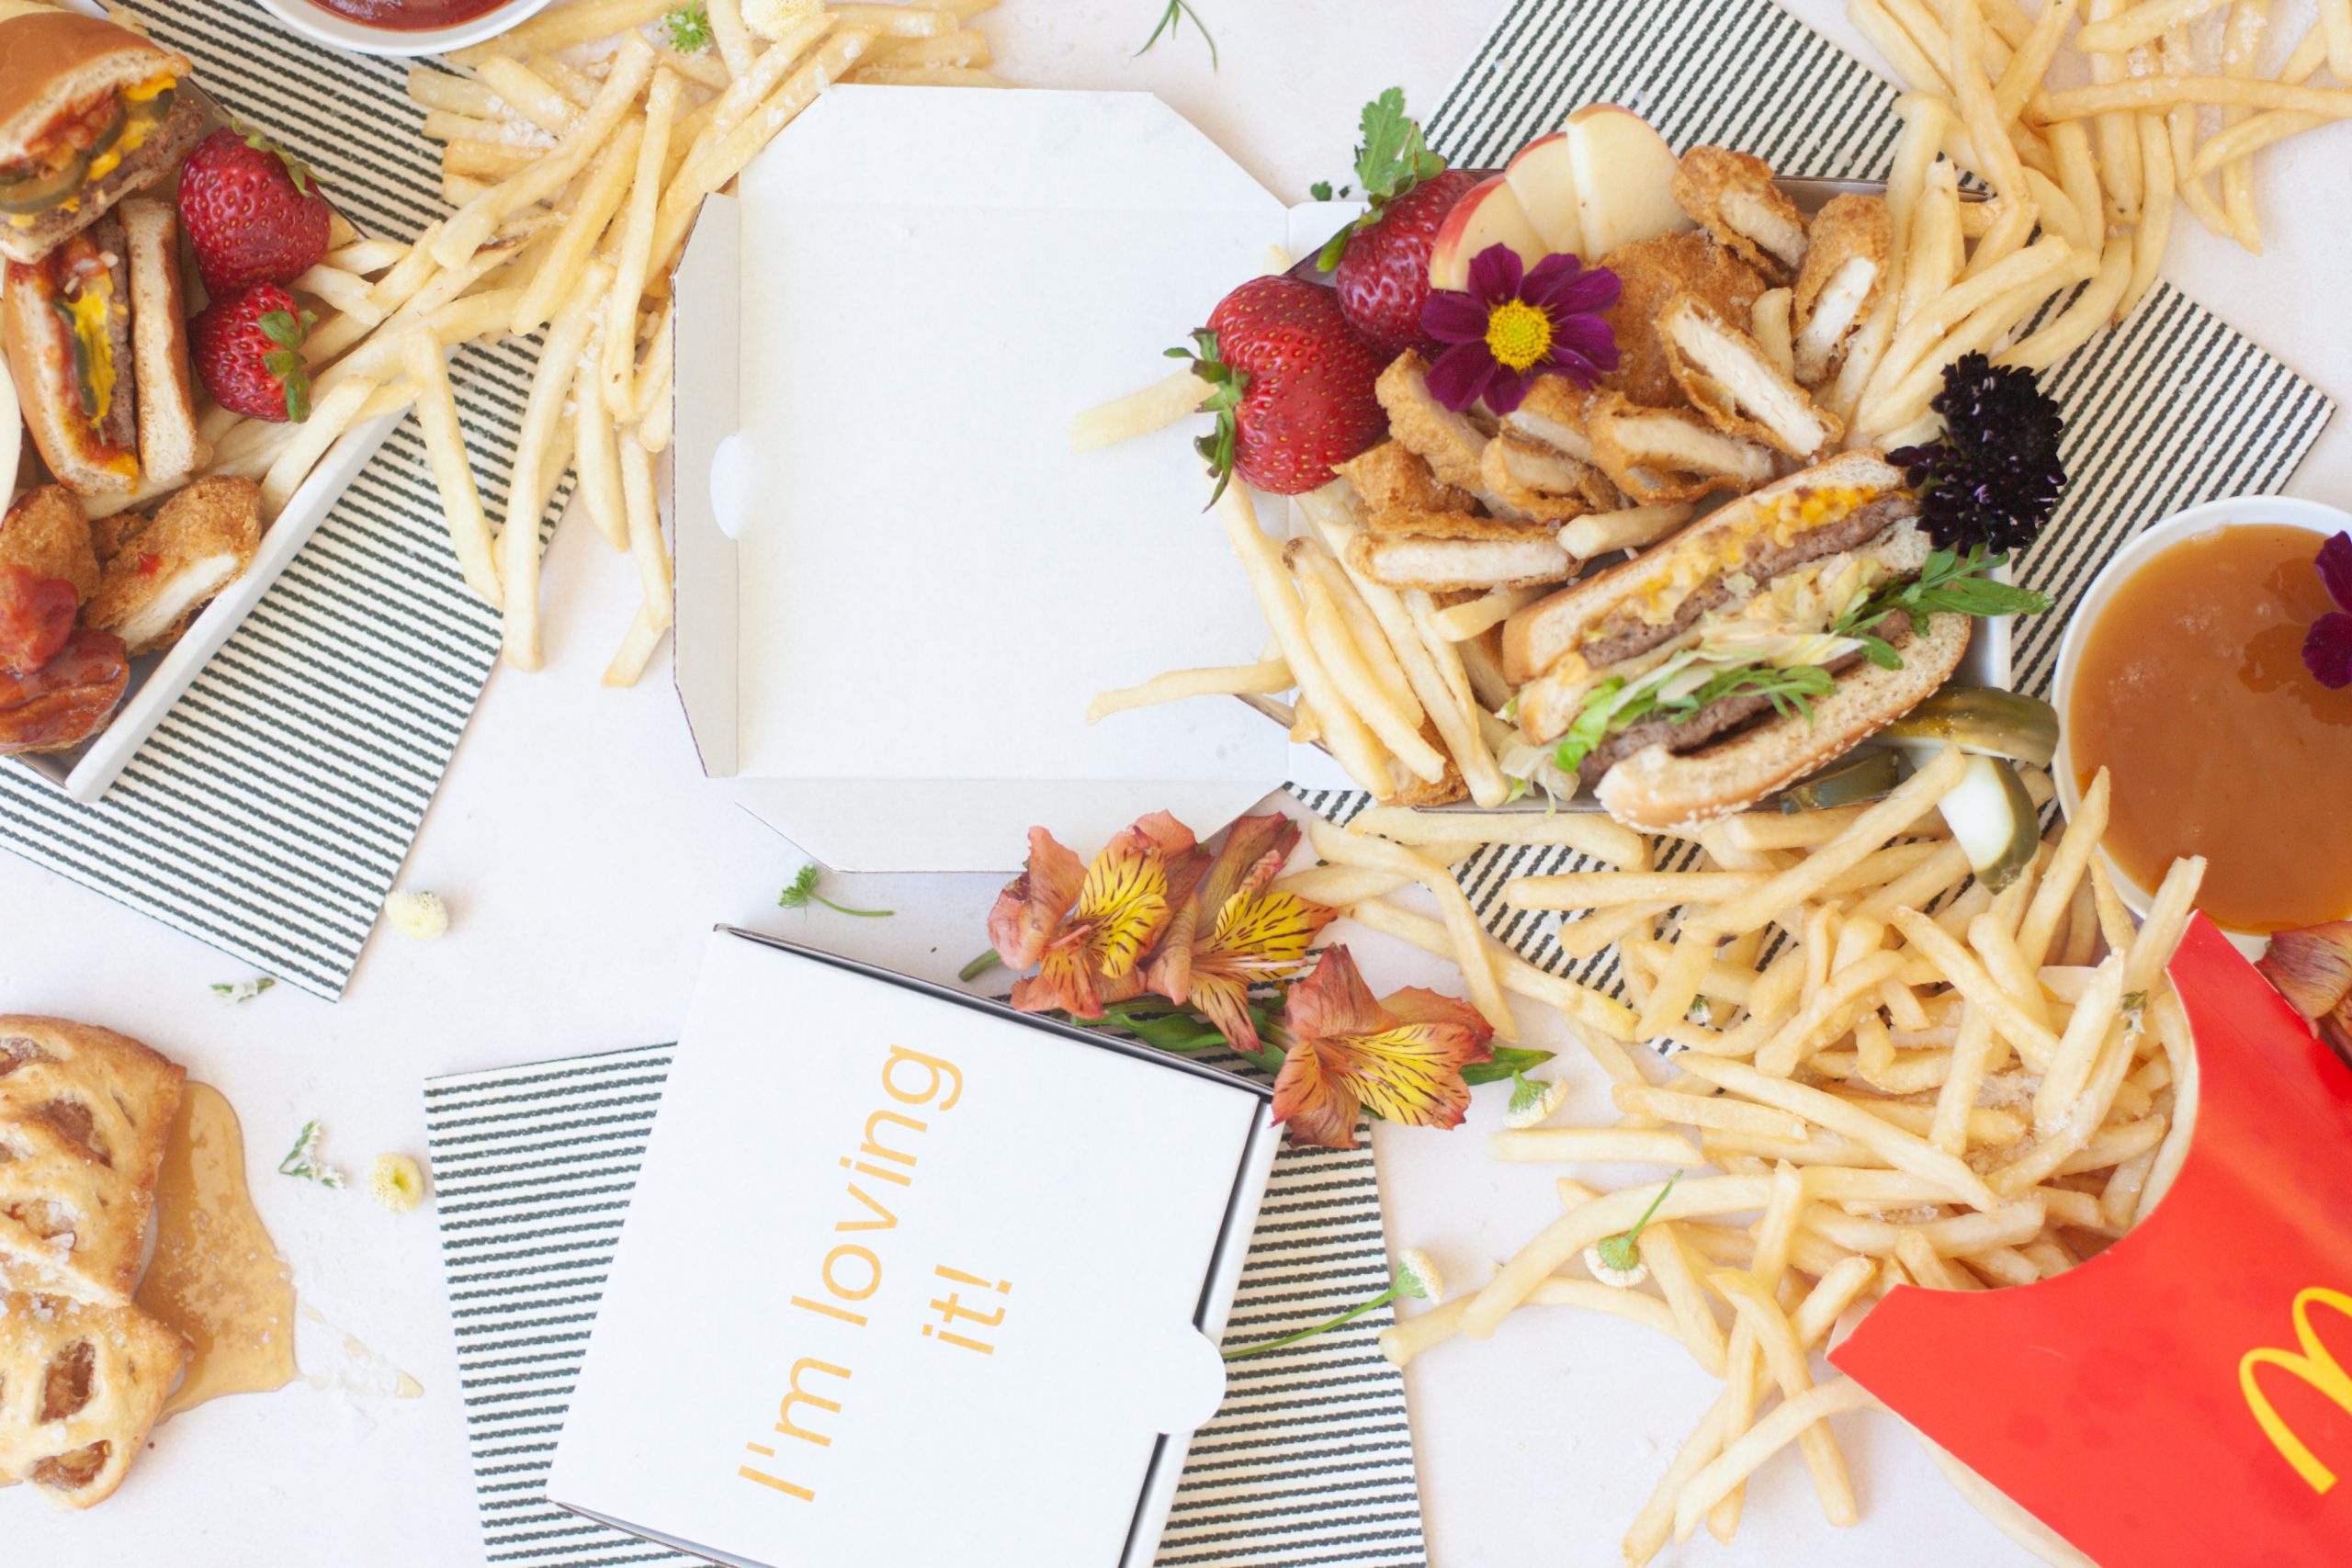 I’m Loving It!, McDonald’s Mini Meals For Your Next Party